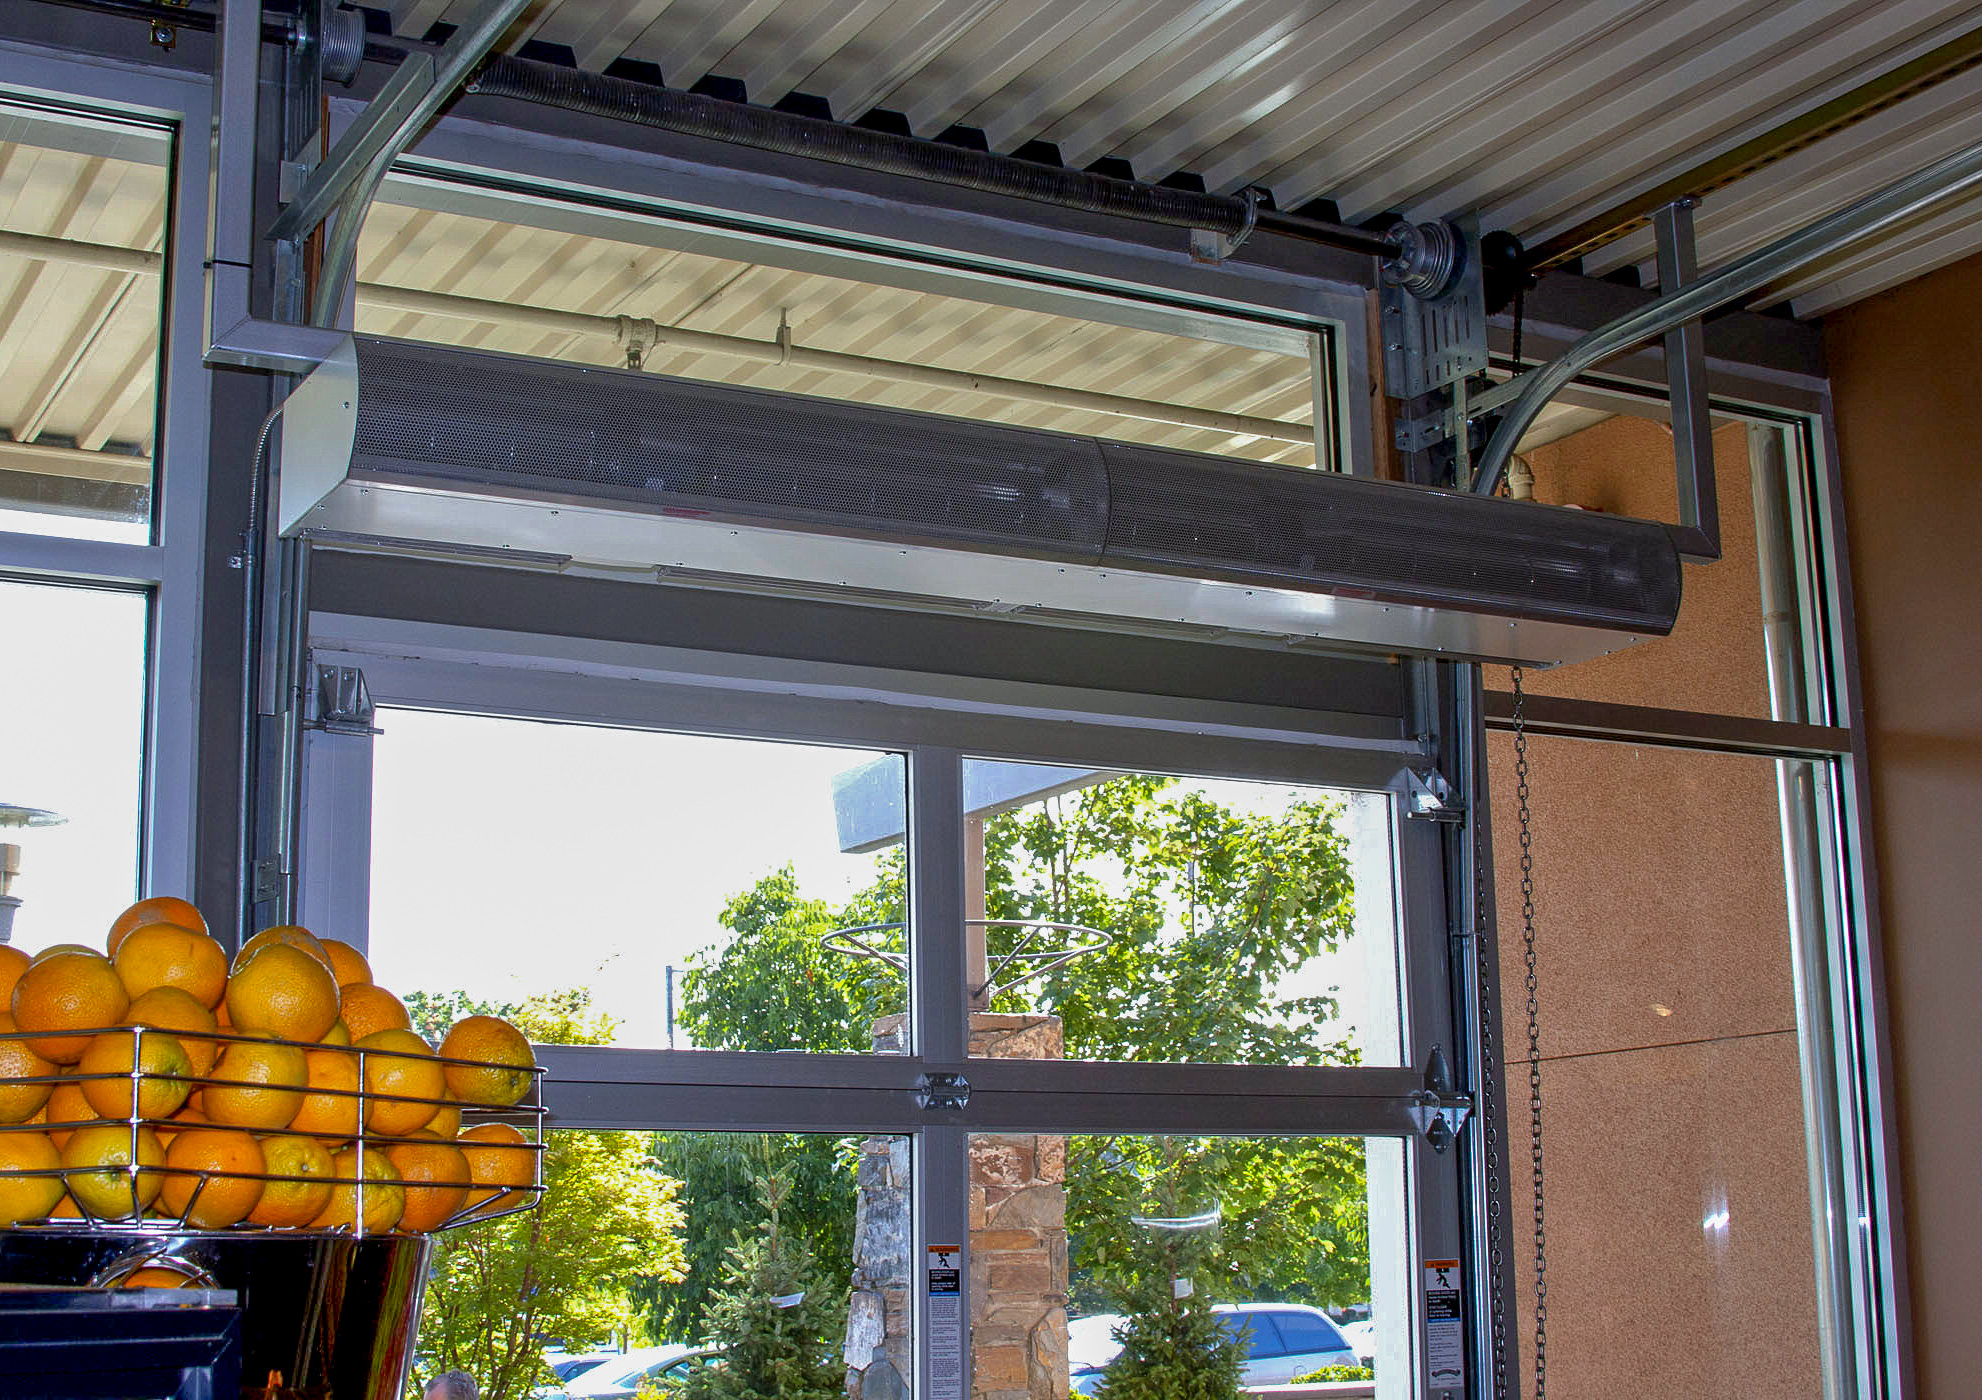 Berner Architectural Low Profile 8 air curtain over grocery store garage door opening.